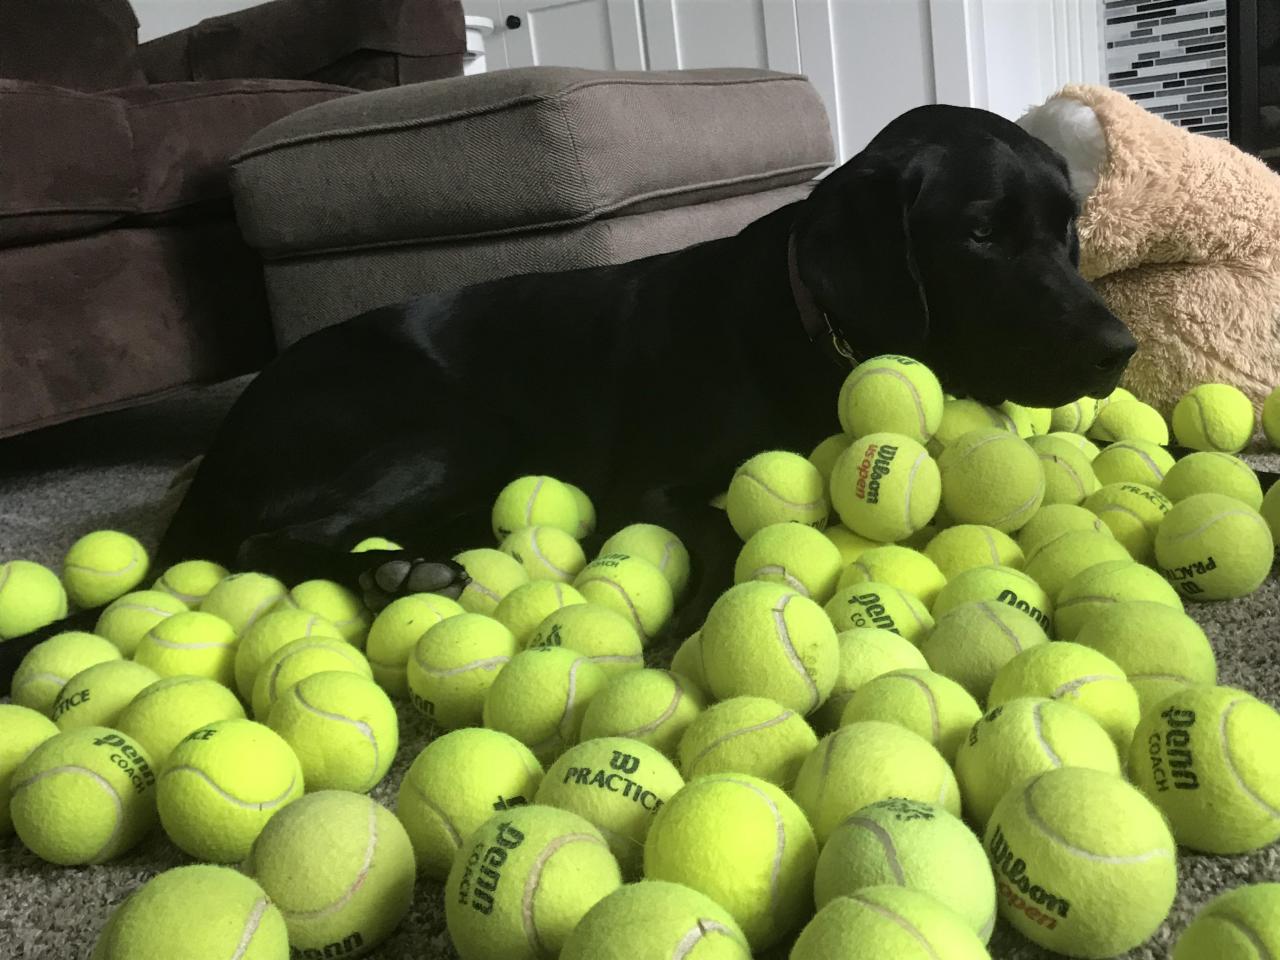 Tennis class ended and we were allowed to take as many balls as we wanted, I grabbed a bunch for stella